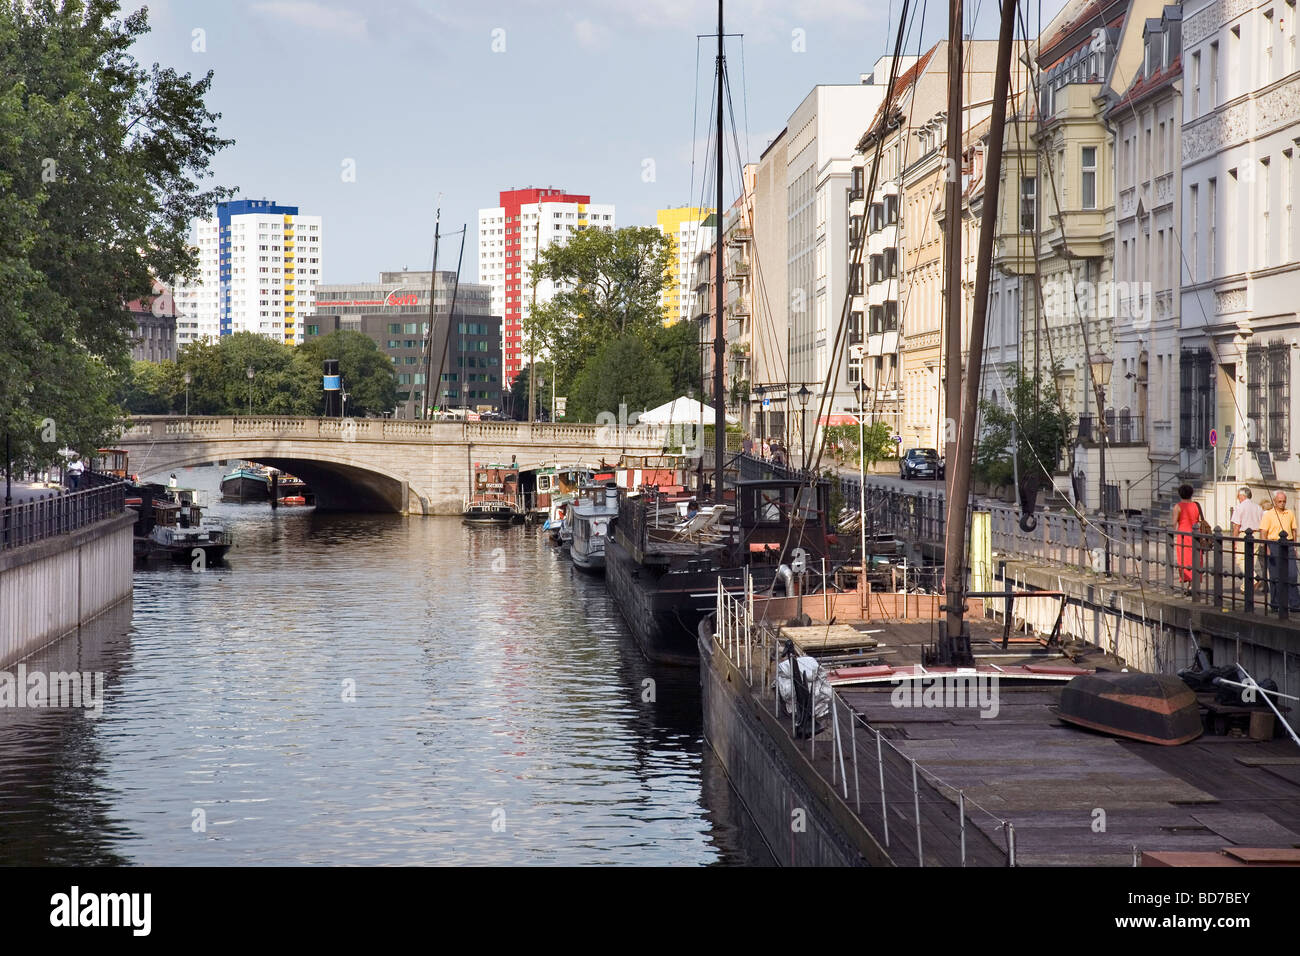 Maerkisches Ufer with Inselbruecke, Berlin, Germany Stock Photo